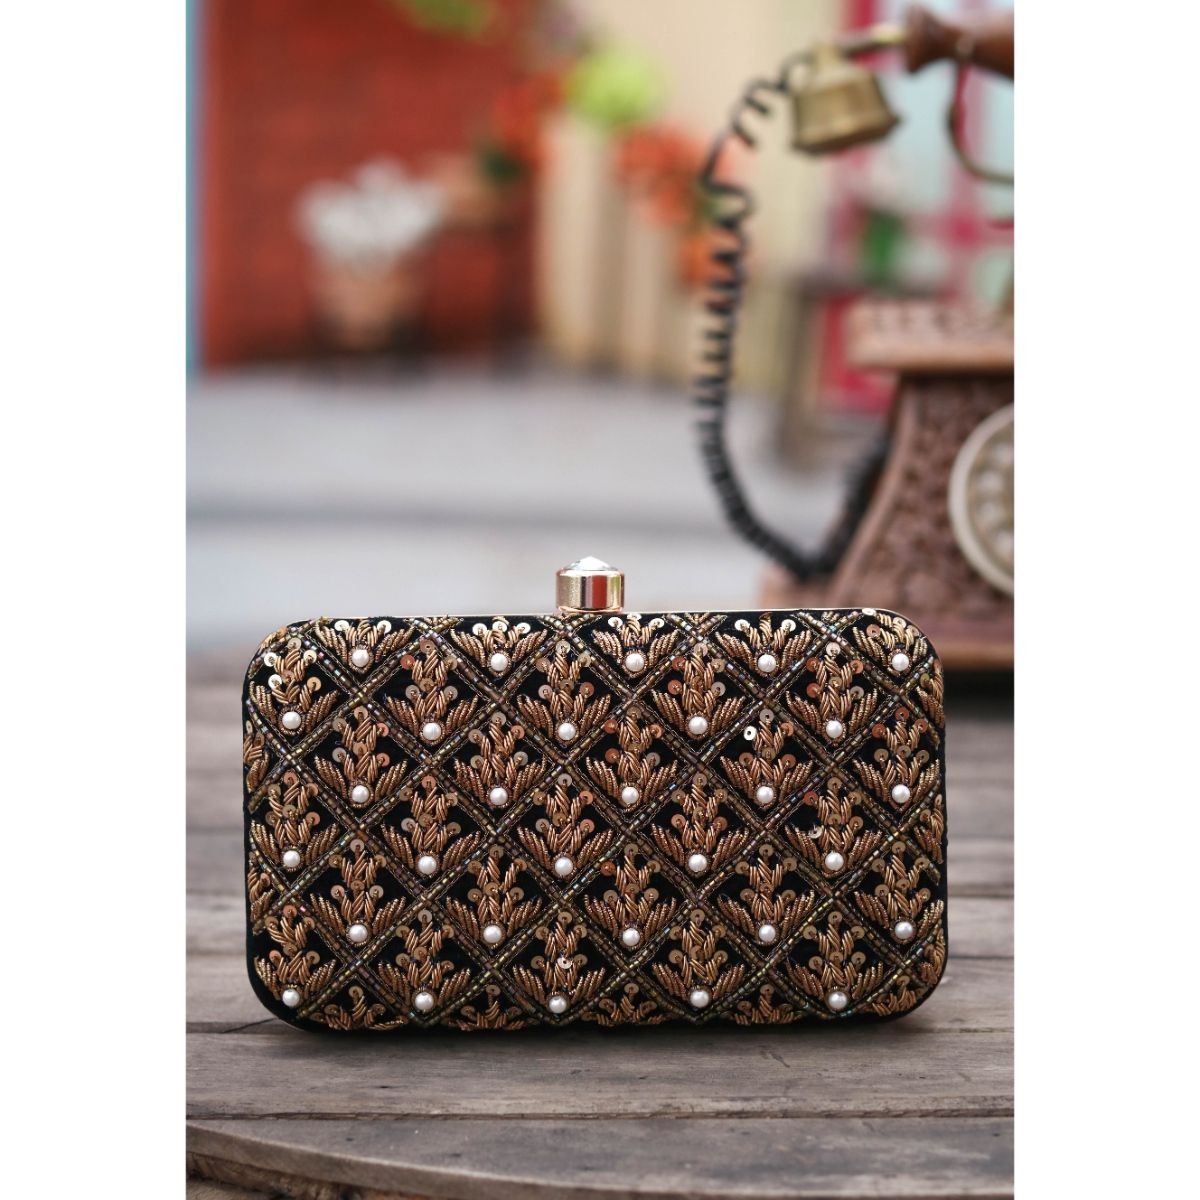 Buy Caramel Brown Embossed Leather Clutch Online - RK India Store View